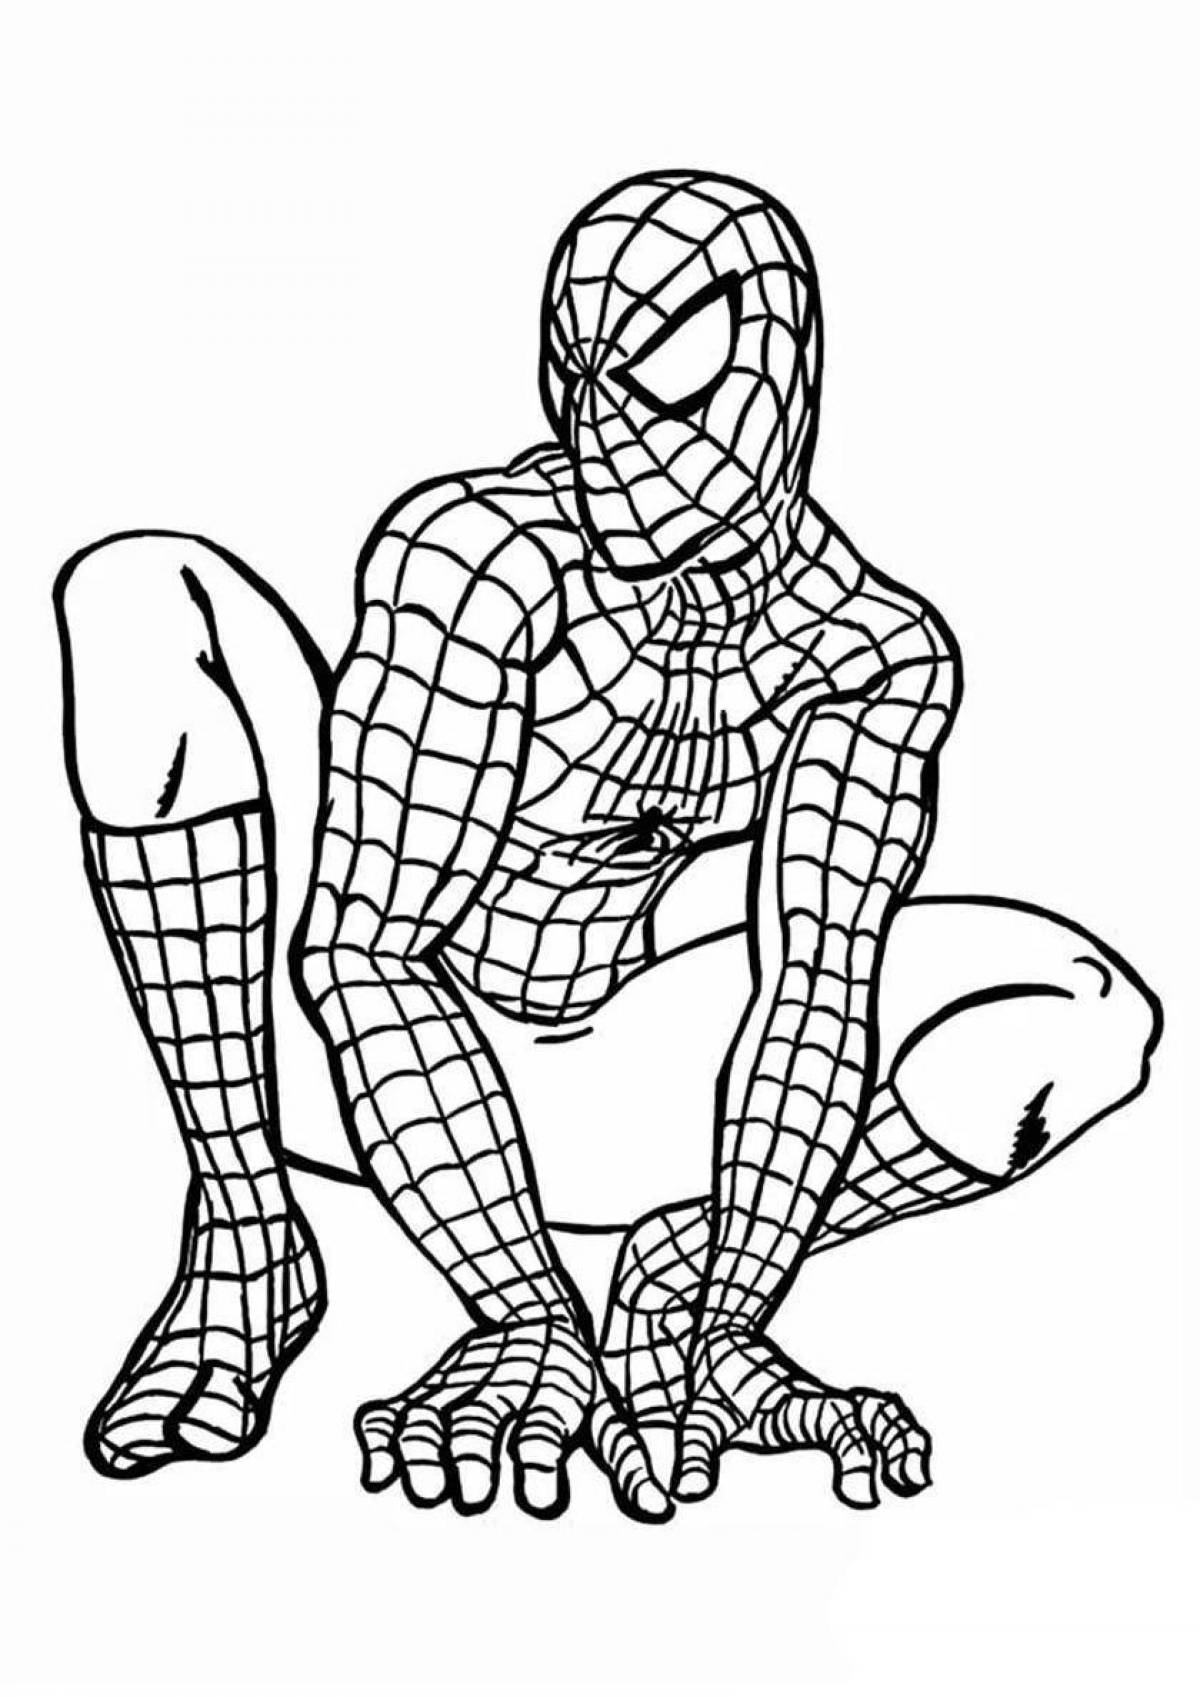 Spiderman's intricately crafted coloring page